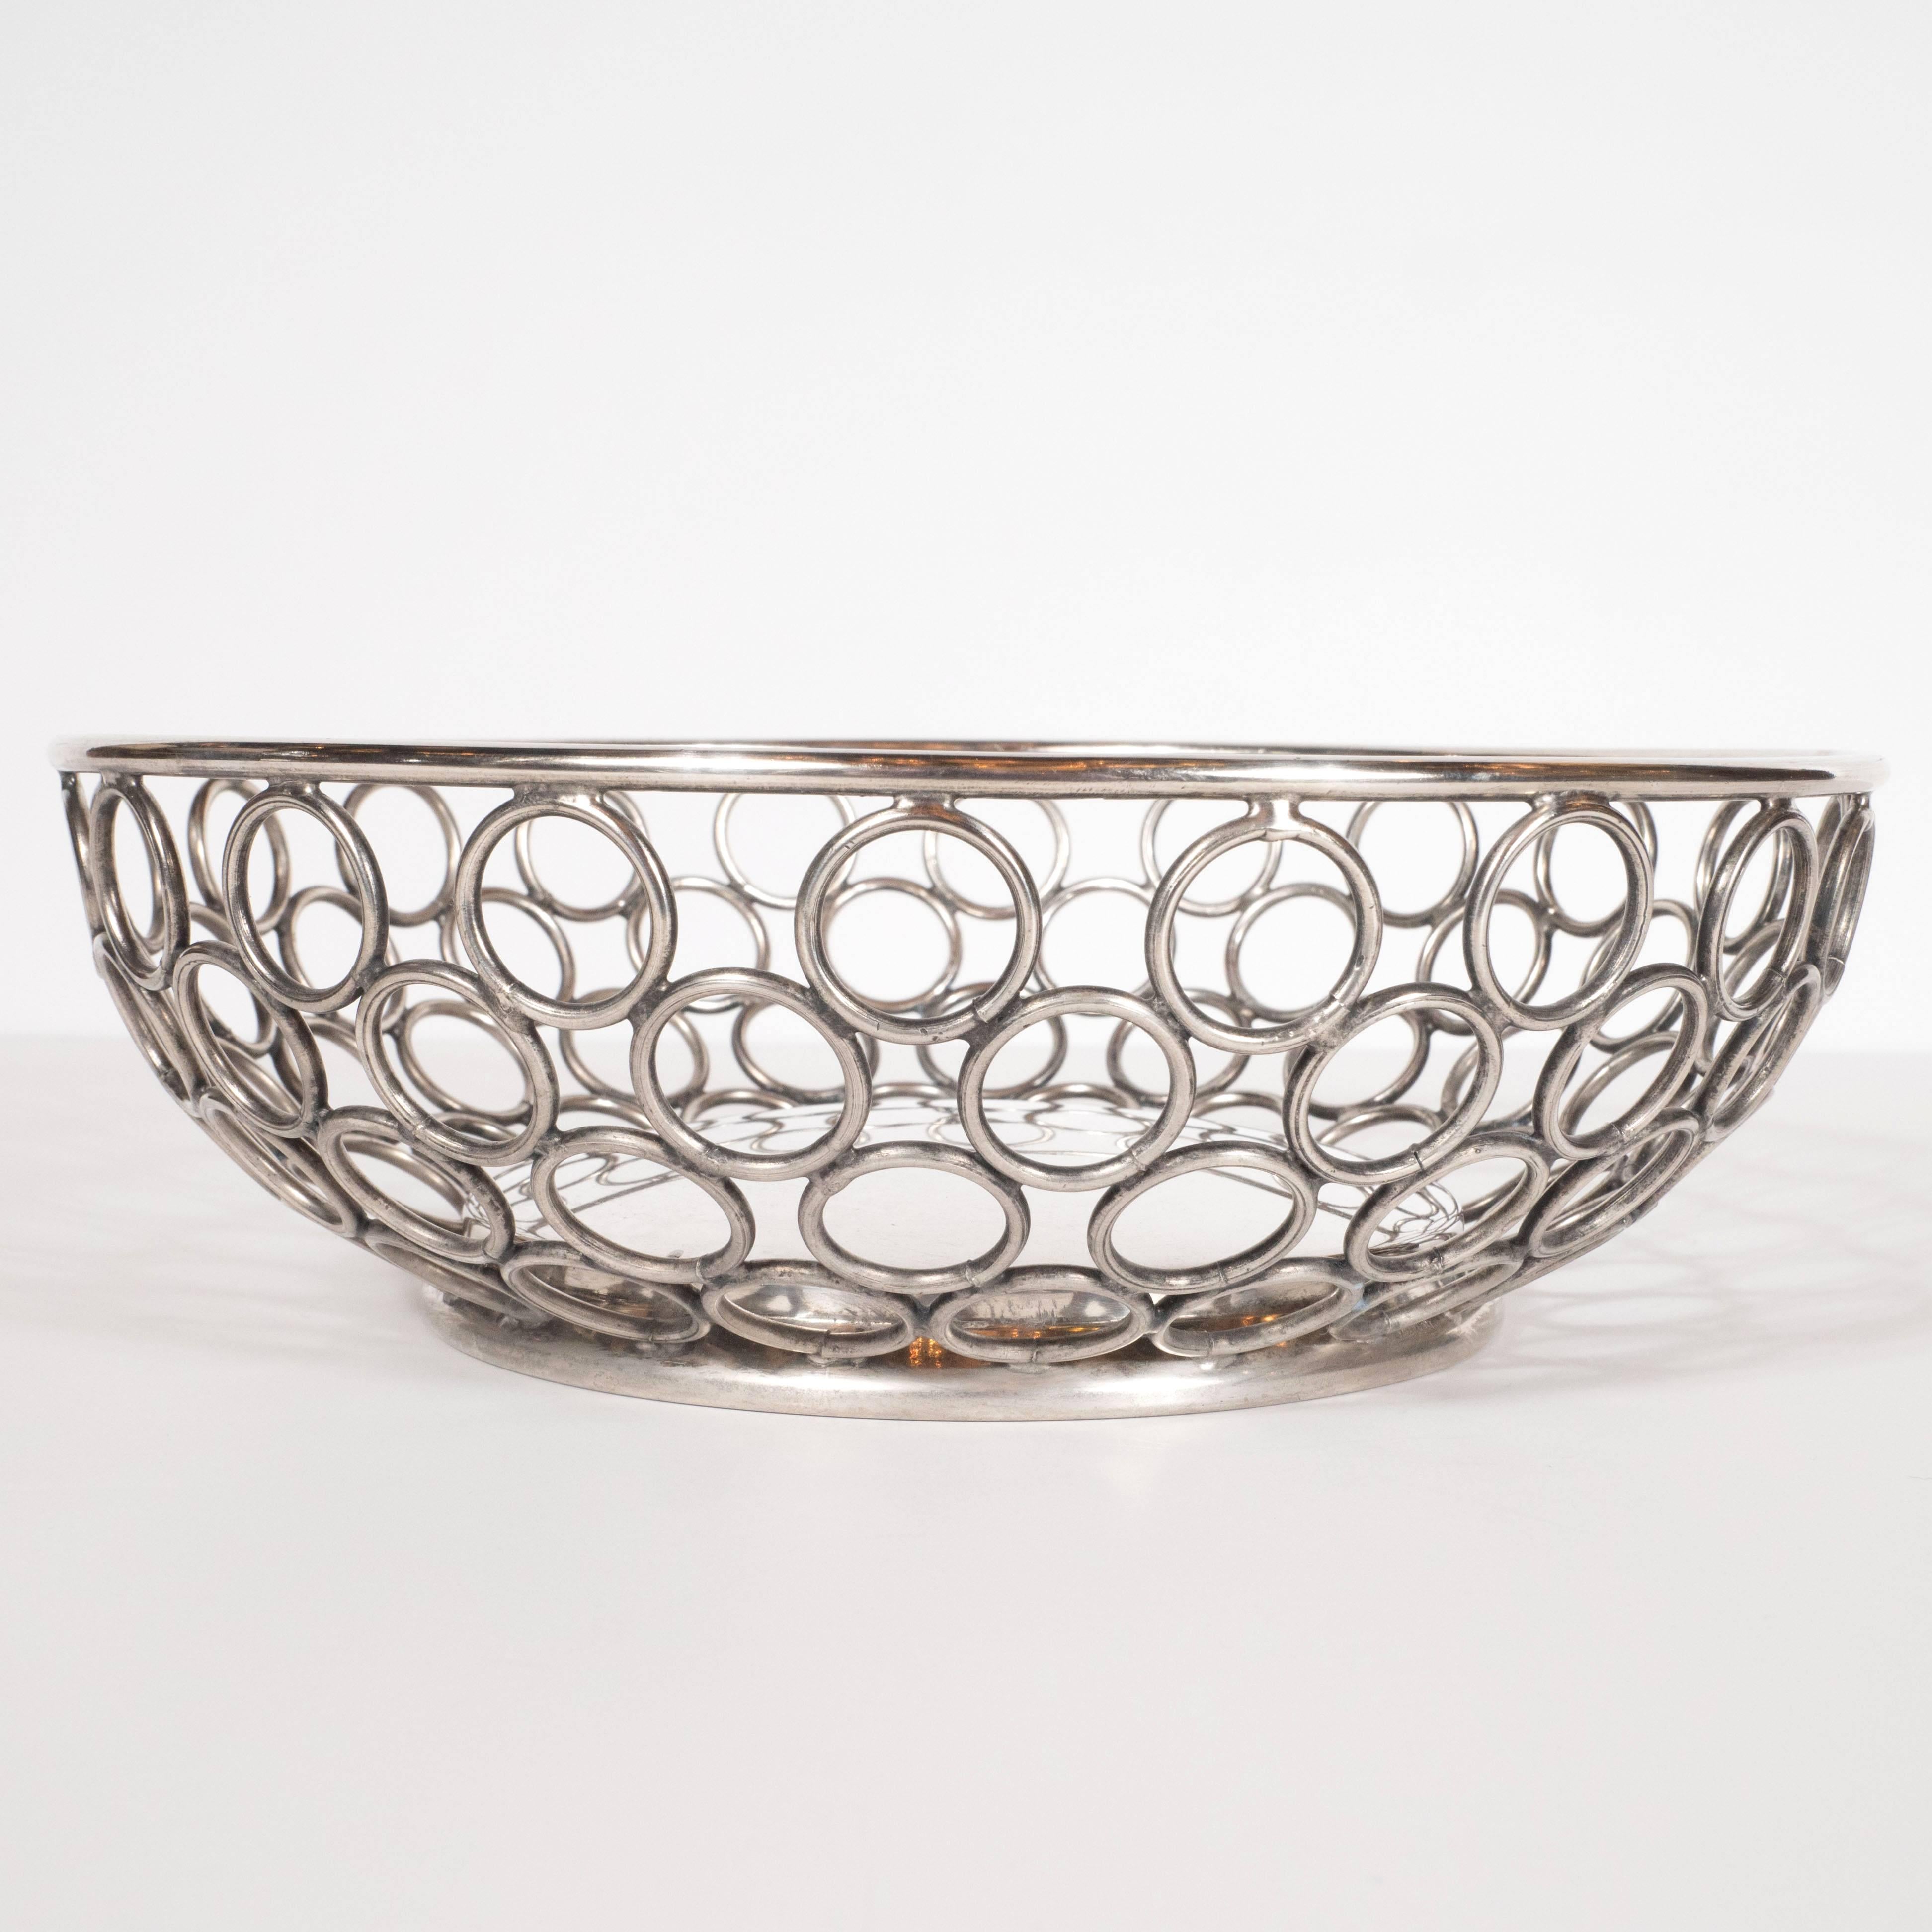 This Mid-Century Modern silver plate bowl or basket was realized in the United States by the renowned Massachussettes based silversmiths, Raimond. This piece reads as quintessentially of the period with its myriad curvilinear forms, including the